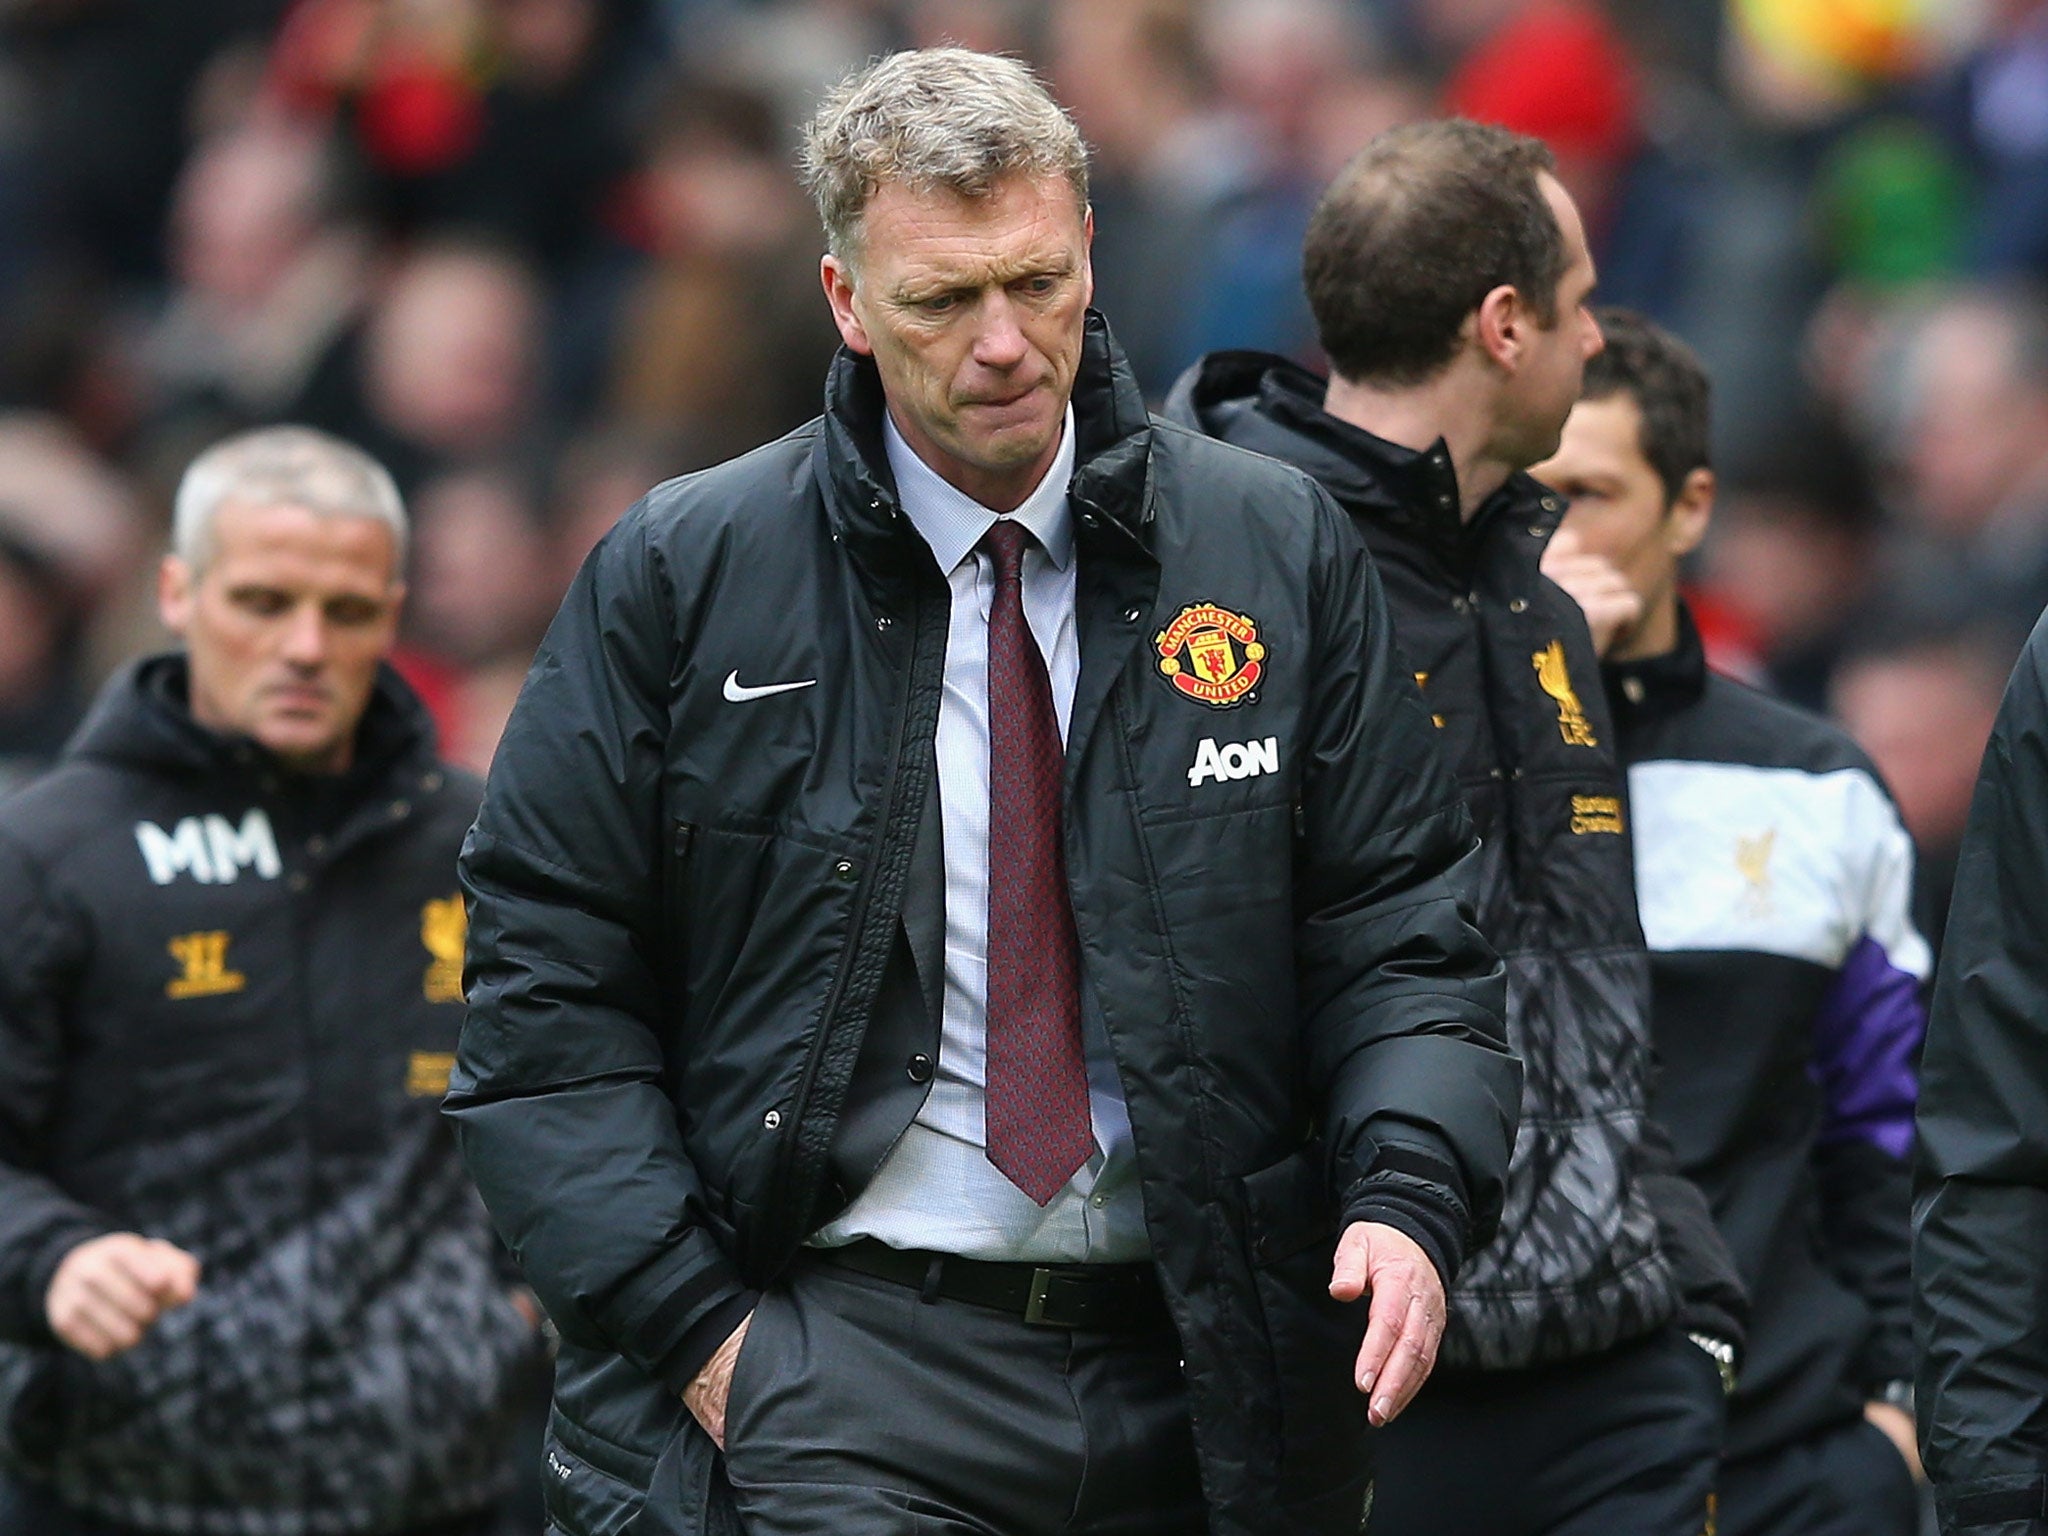 David Moyes pictured at Old Trafford following Manchester United's 3-0 loss to Liverpool